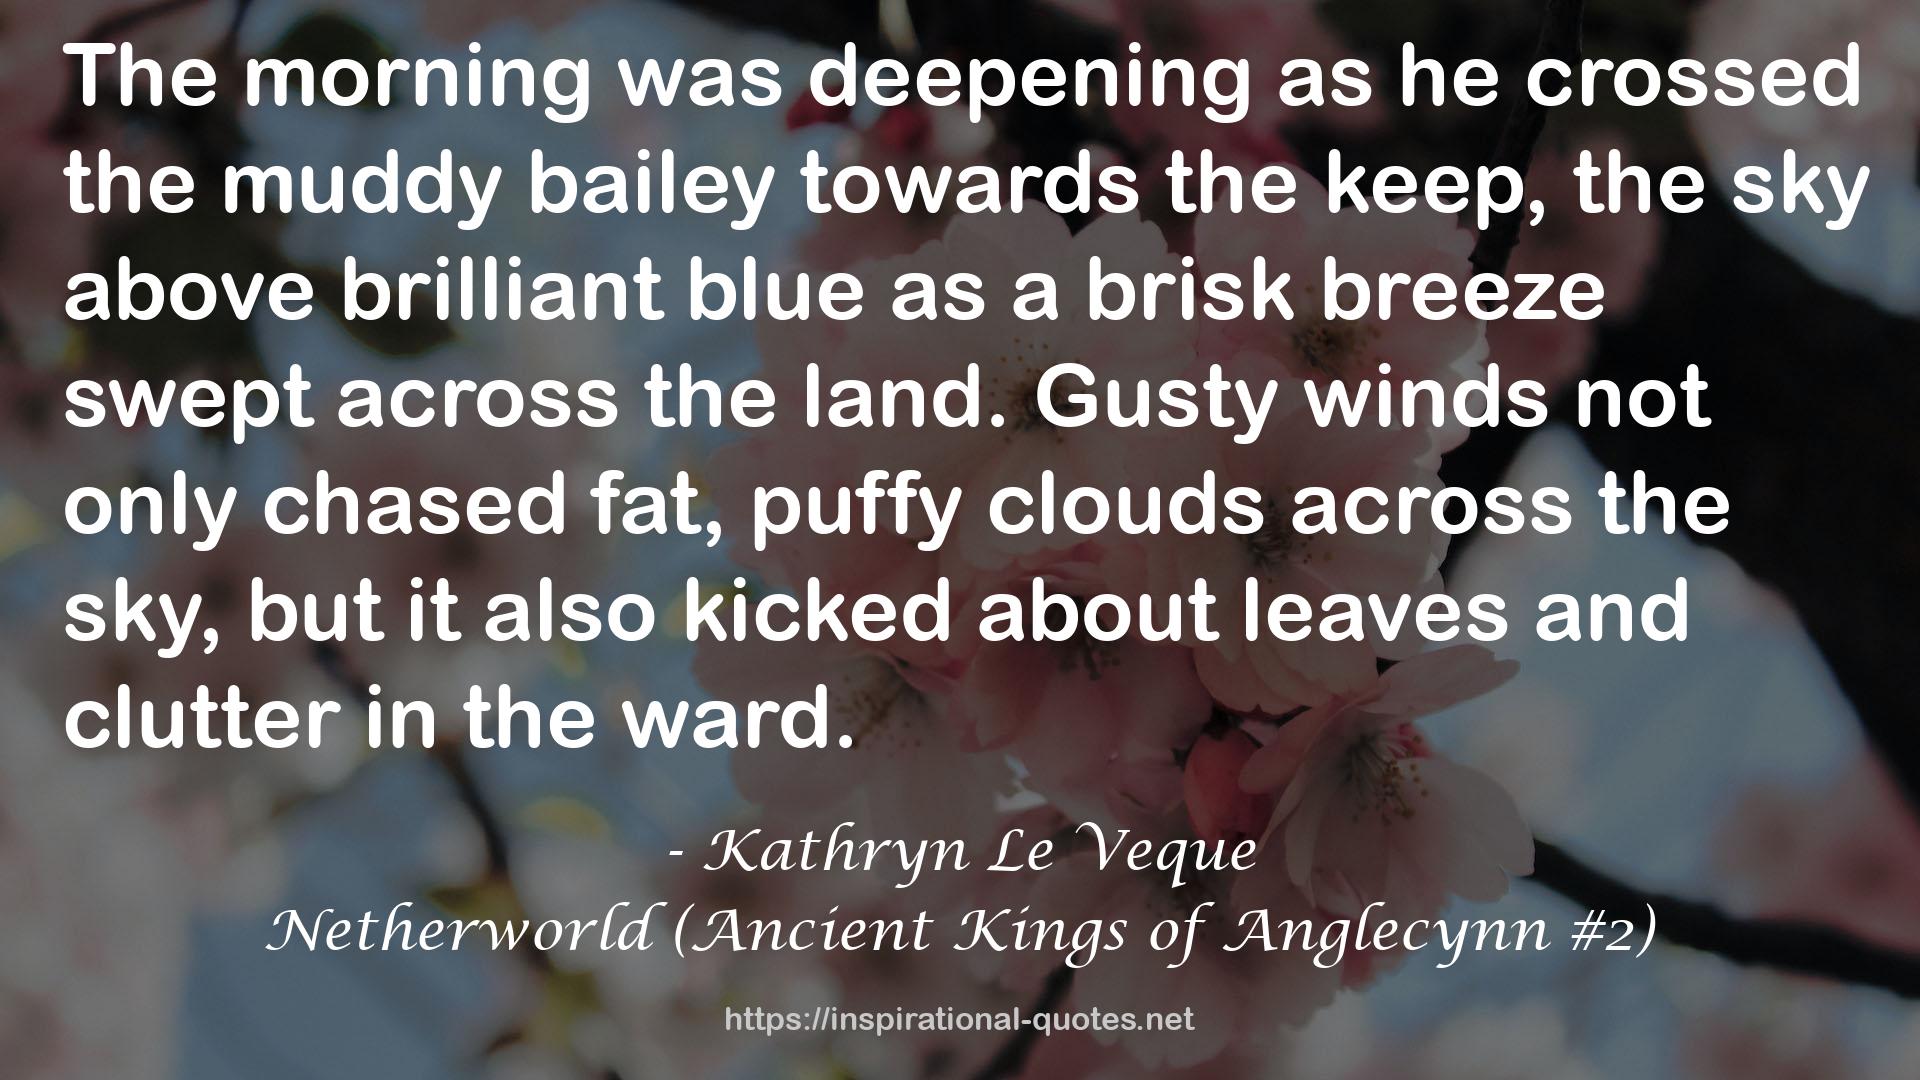 Netherworld (Ancient Kings of Anglecynn #2) QUOTES